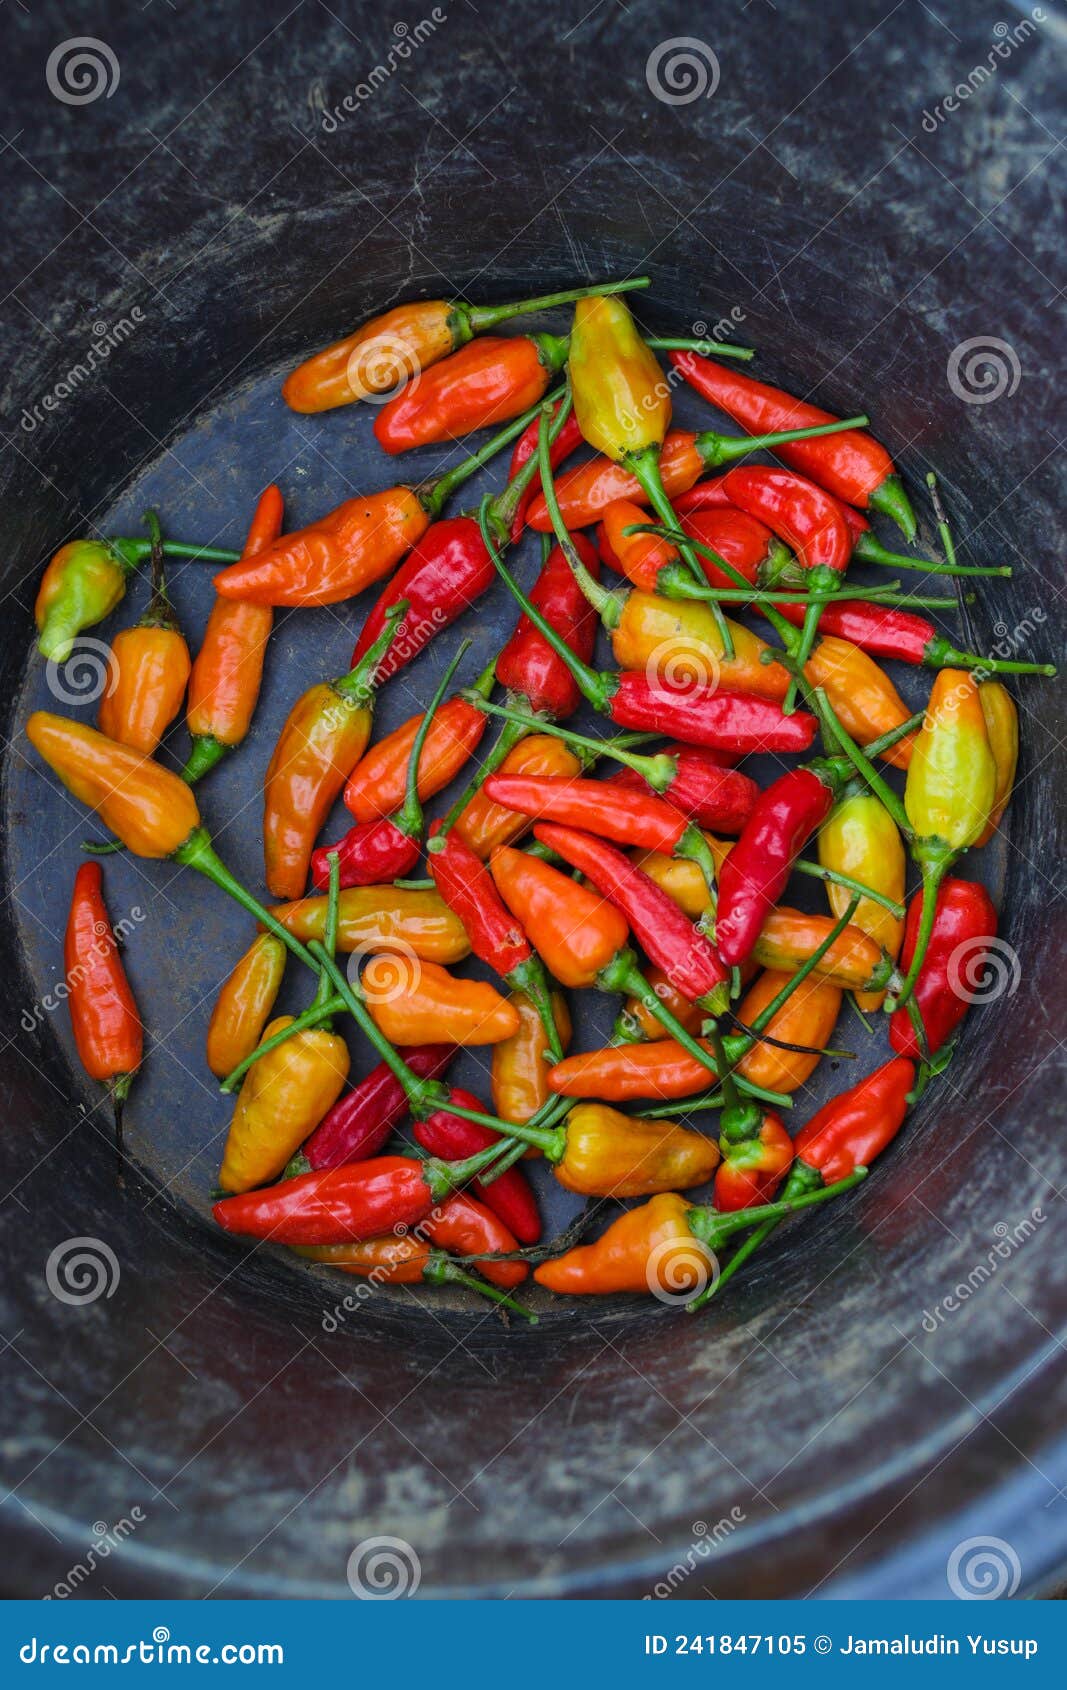 a bunch of datil peppers or cabai rawit merah on a black bucket, is freshly harvested by indonesian local farmers from the garden